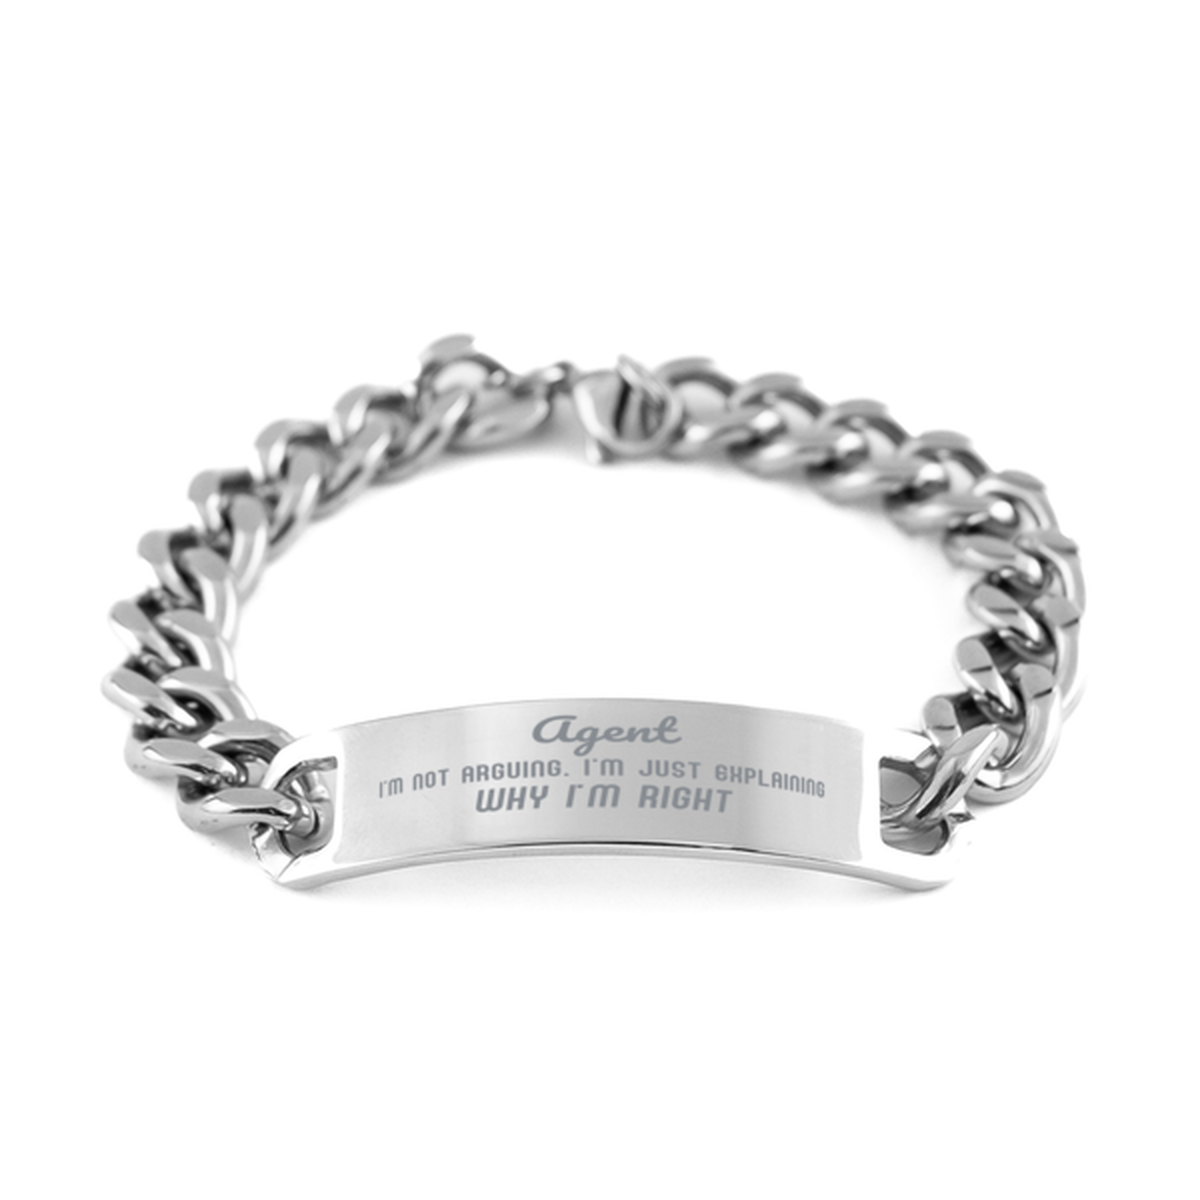 Agent I'm not Arguing. I'm Just Explaining Why I'm RIGHT Cuban Chain Stainless Steel Bracelet, Graduation Birthday Christmas Agent Gifts For Agent Funny Saying Quote Present for Men Women Coworker